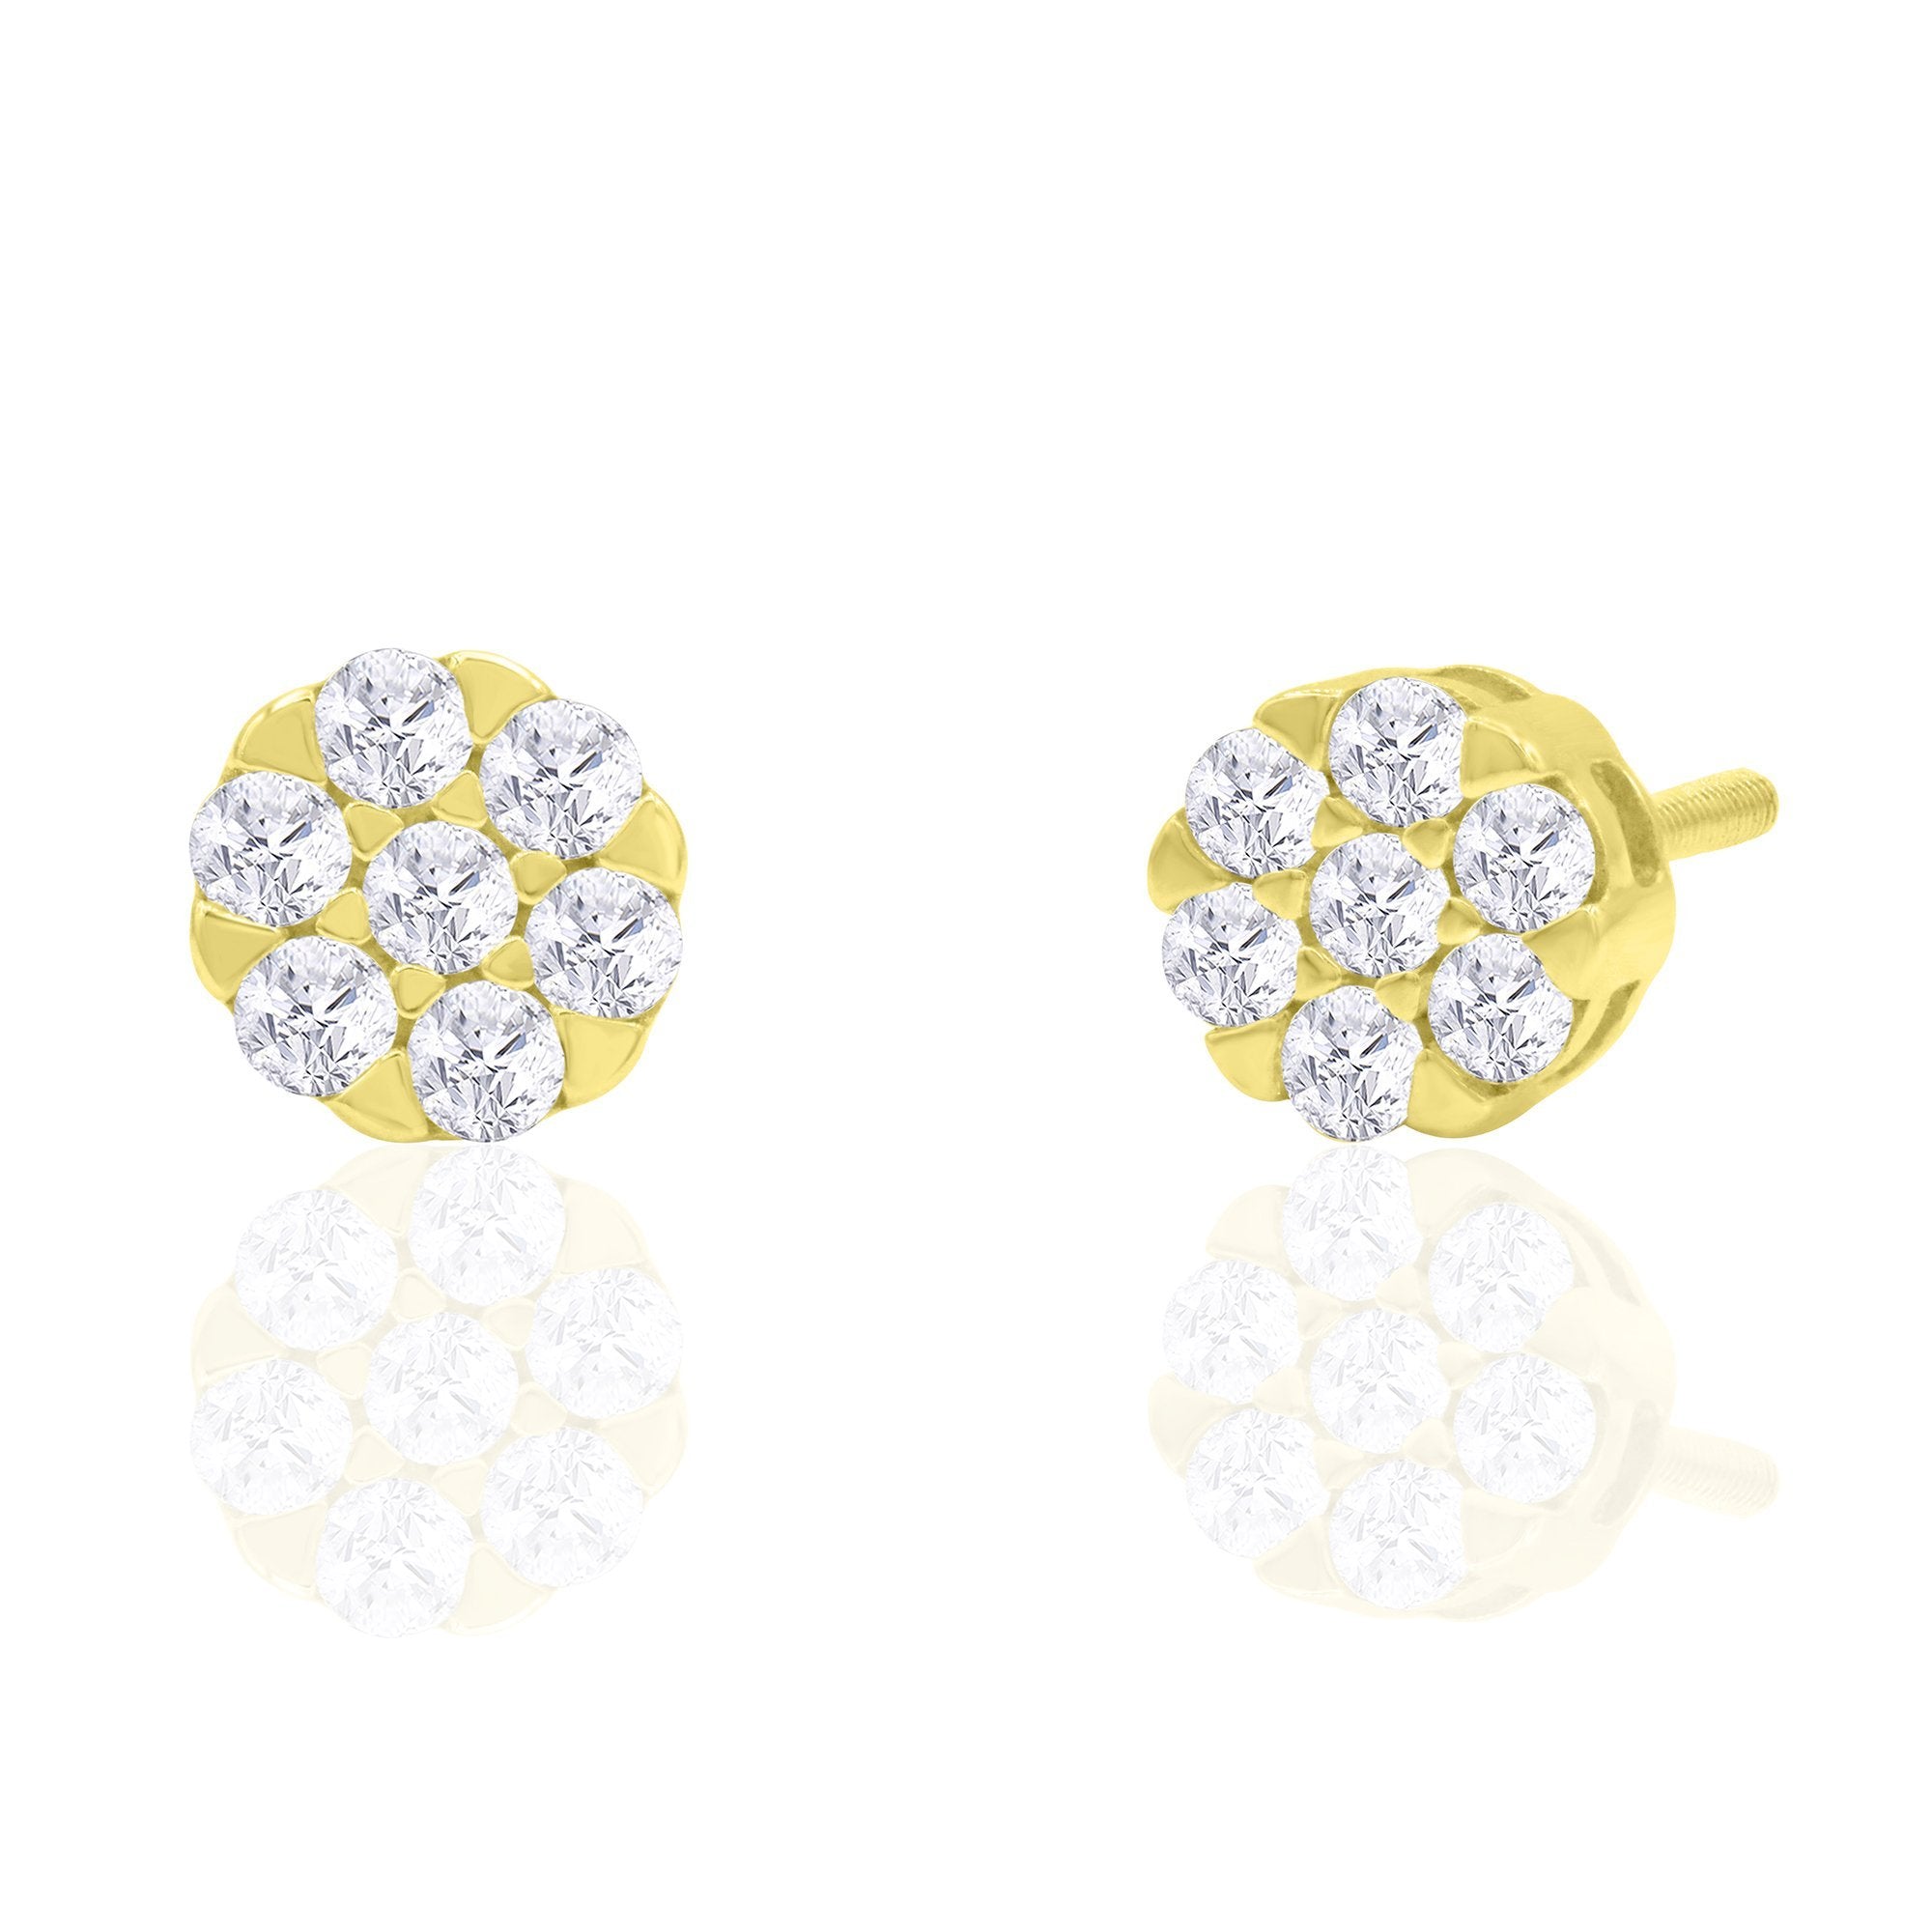 14K Solid Gold 0.33ctw Diamond Stud Earrings - anygolds